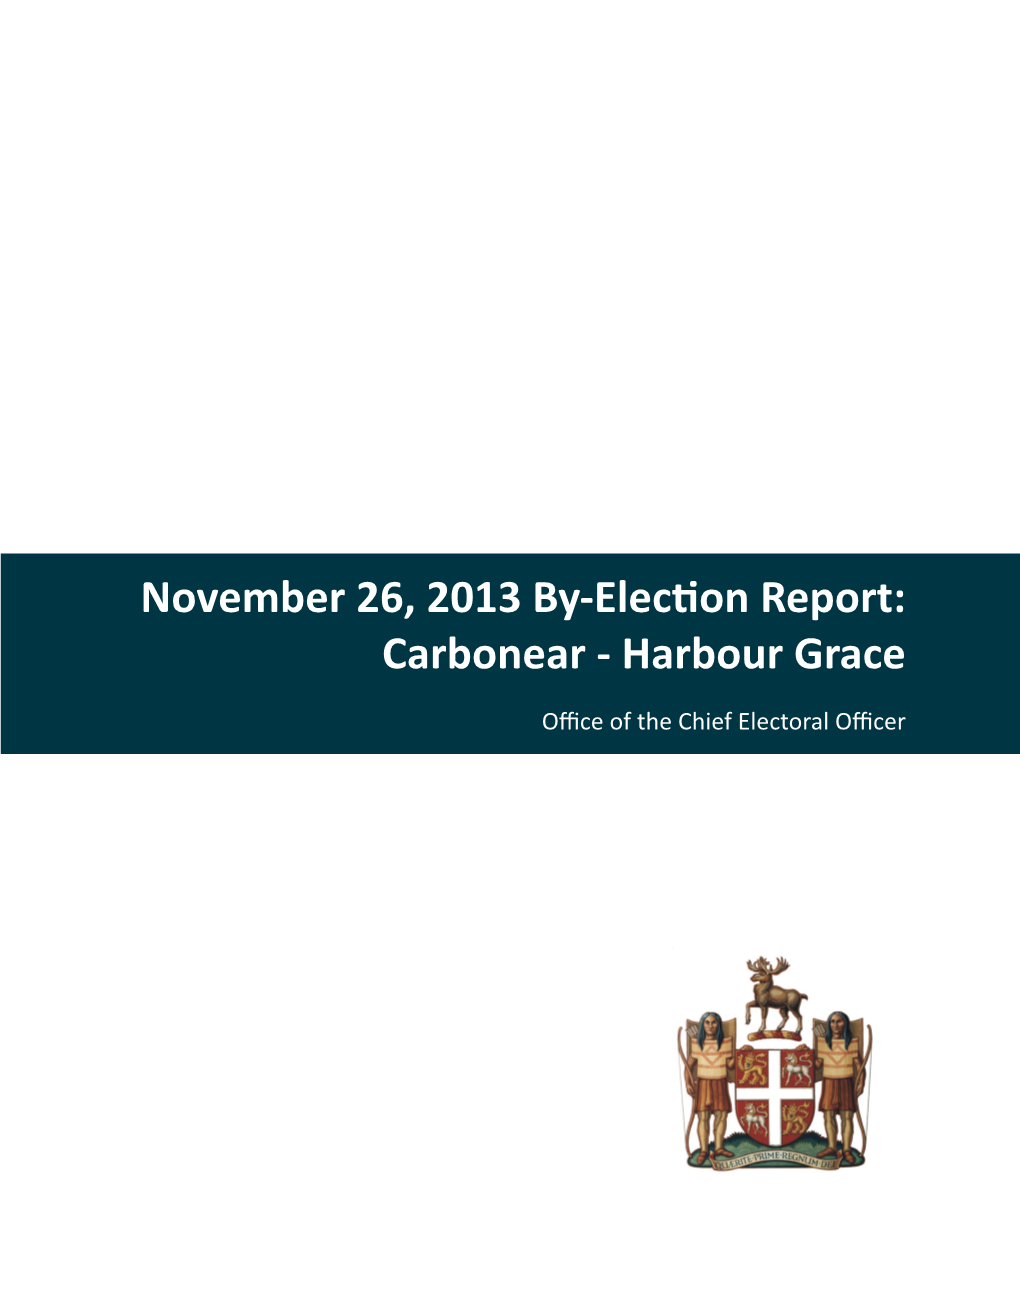 November 26, 2013 By-Election Report: Carbonear - Harbour Grace